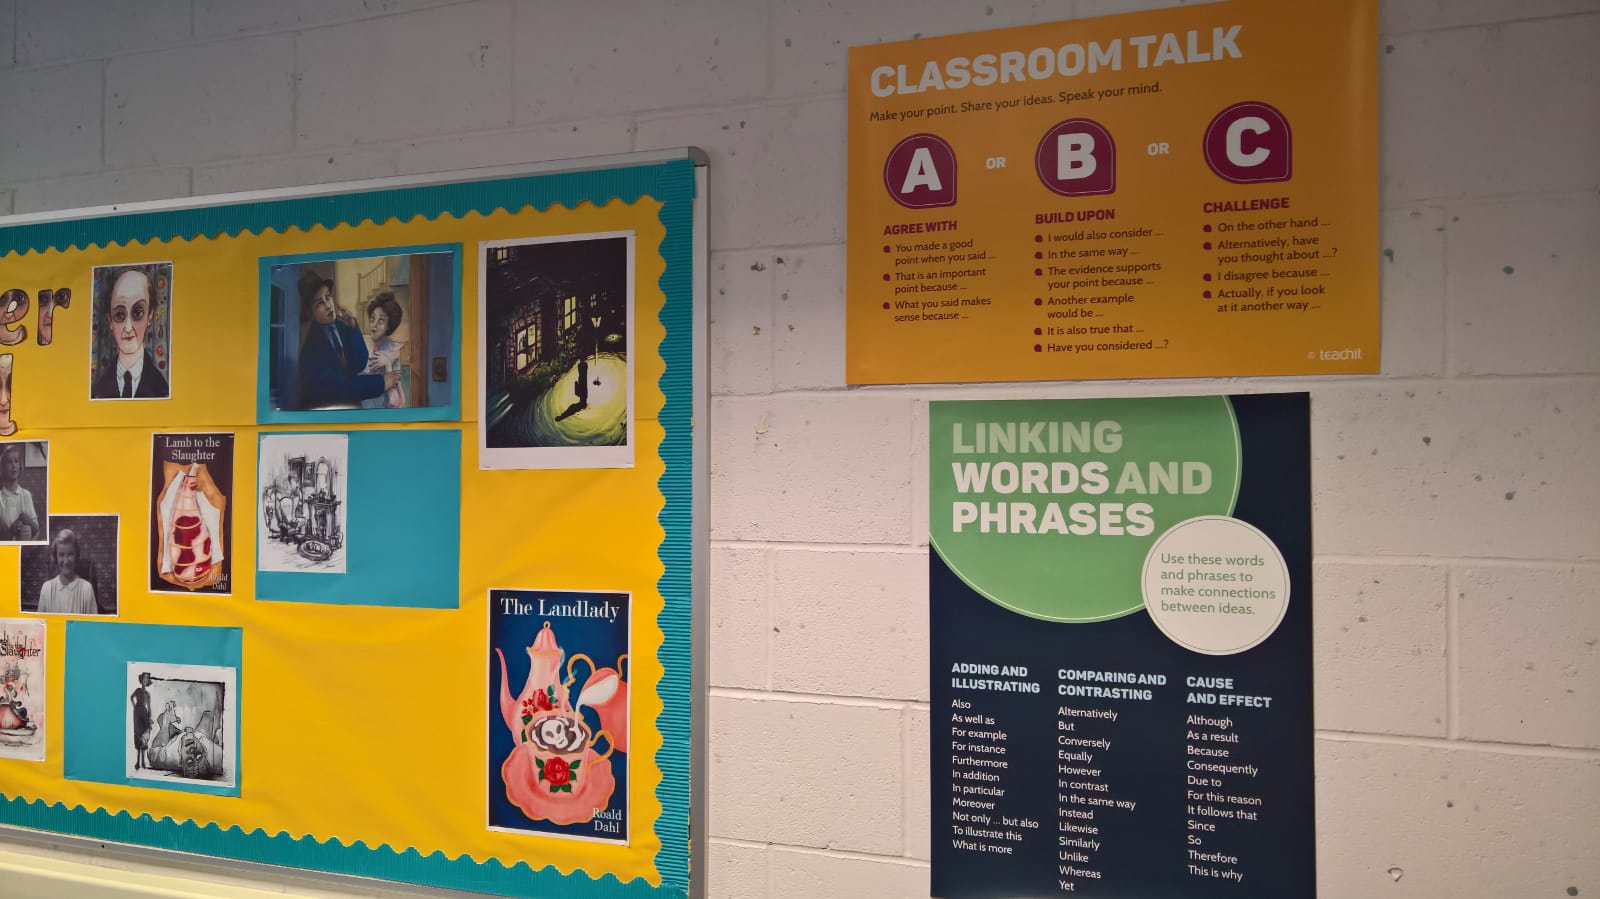 An image of a classroom display